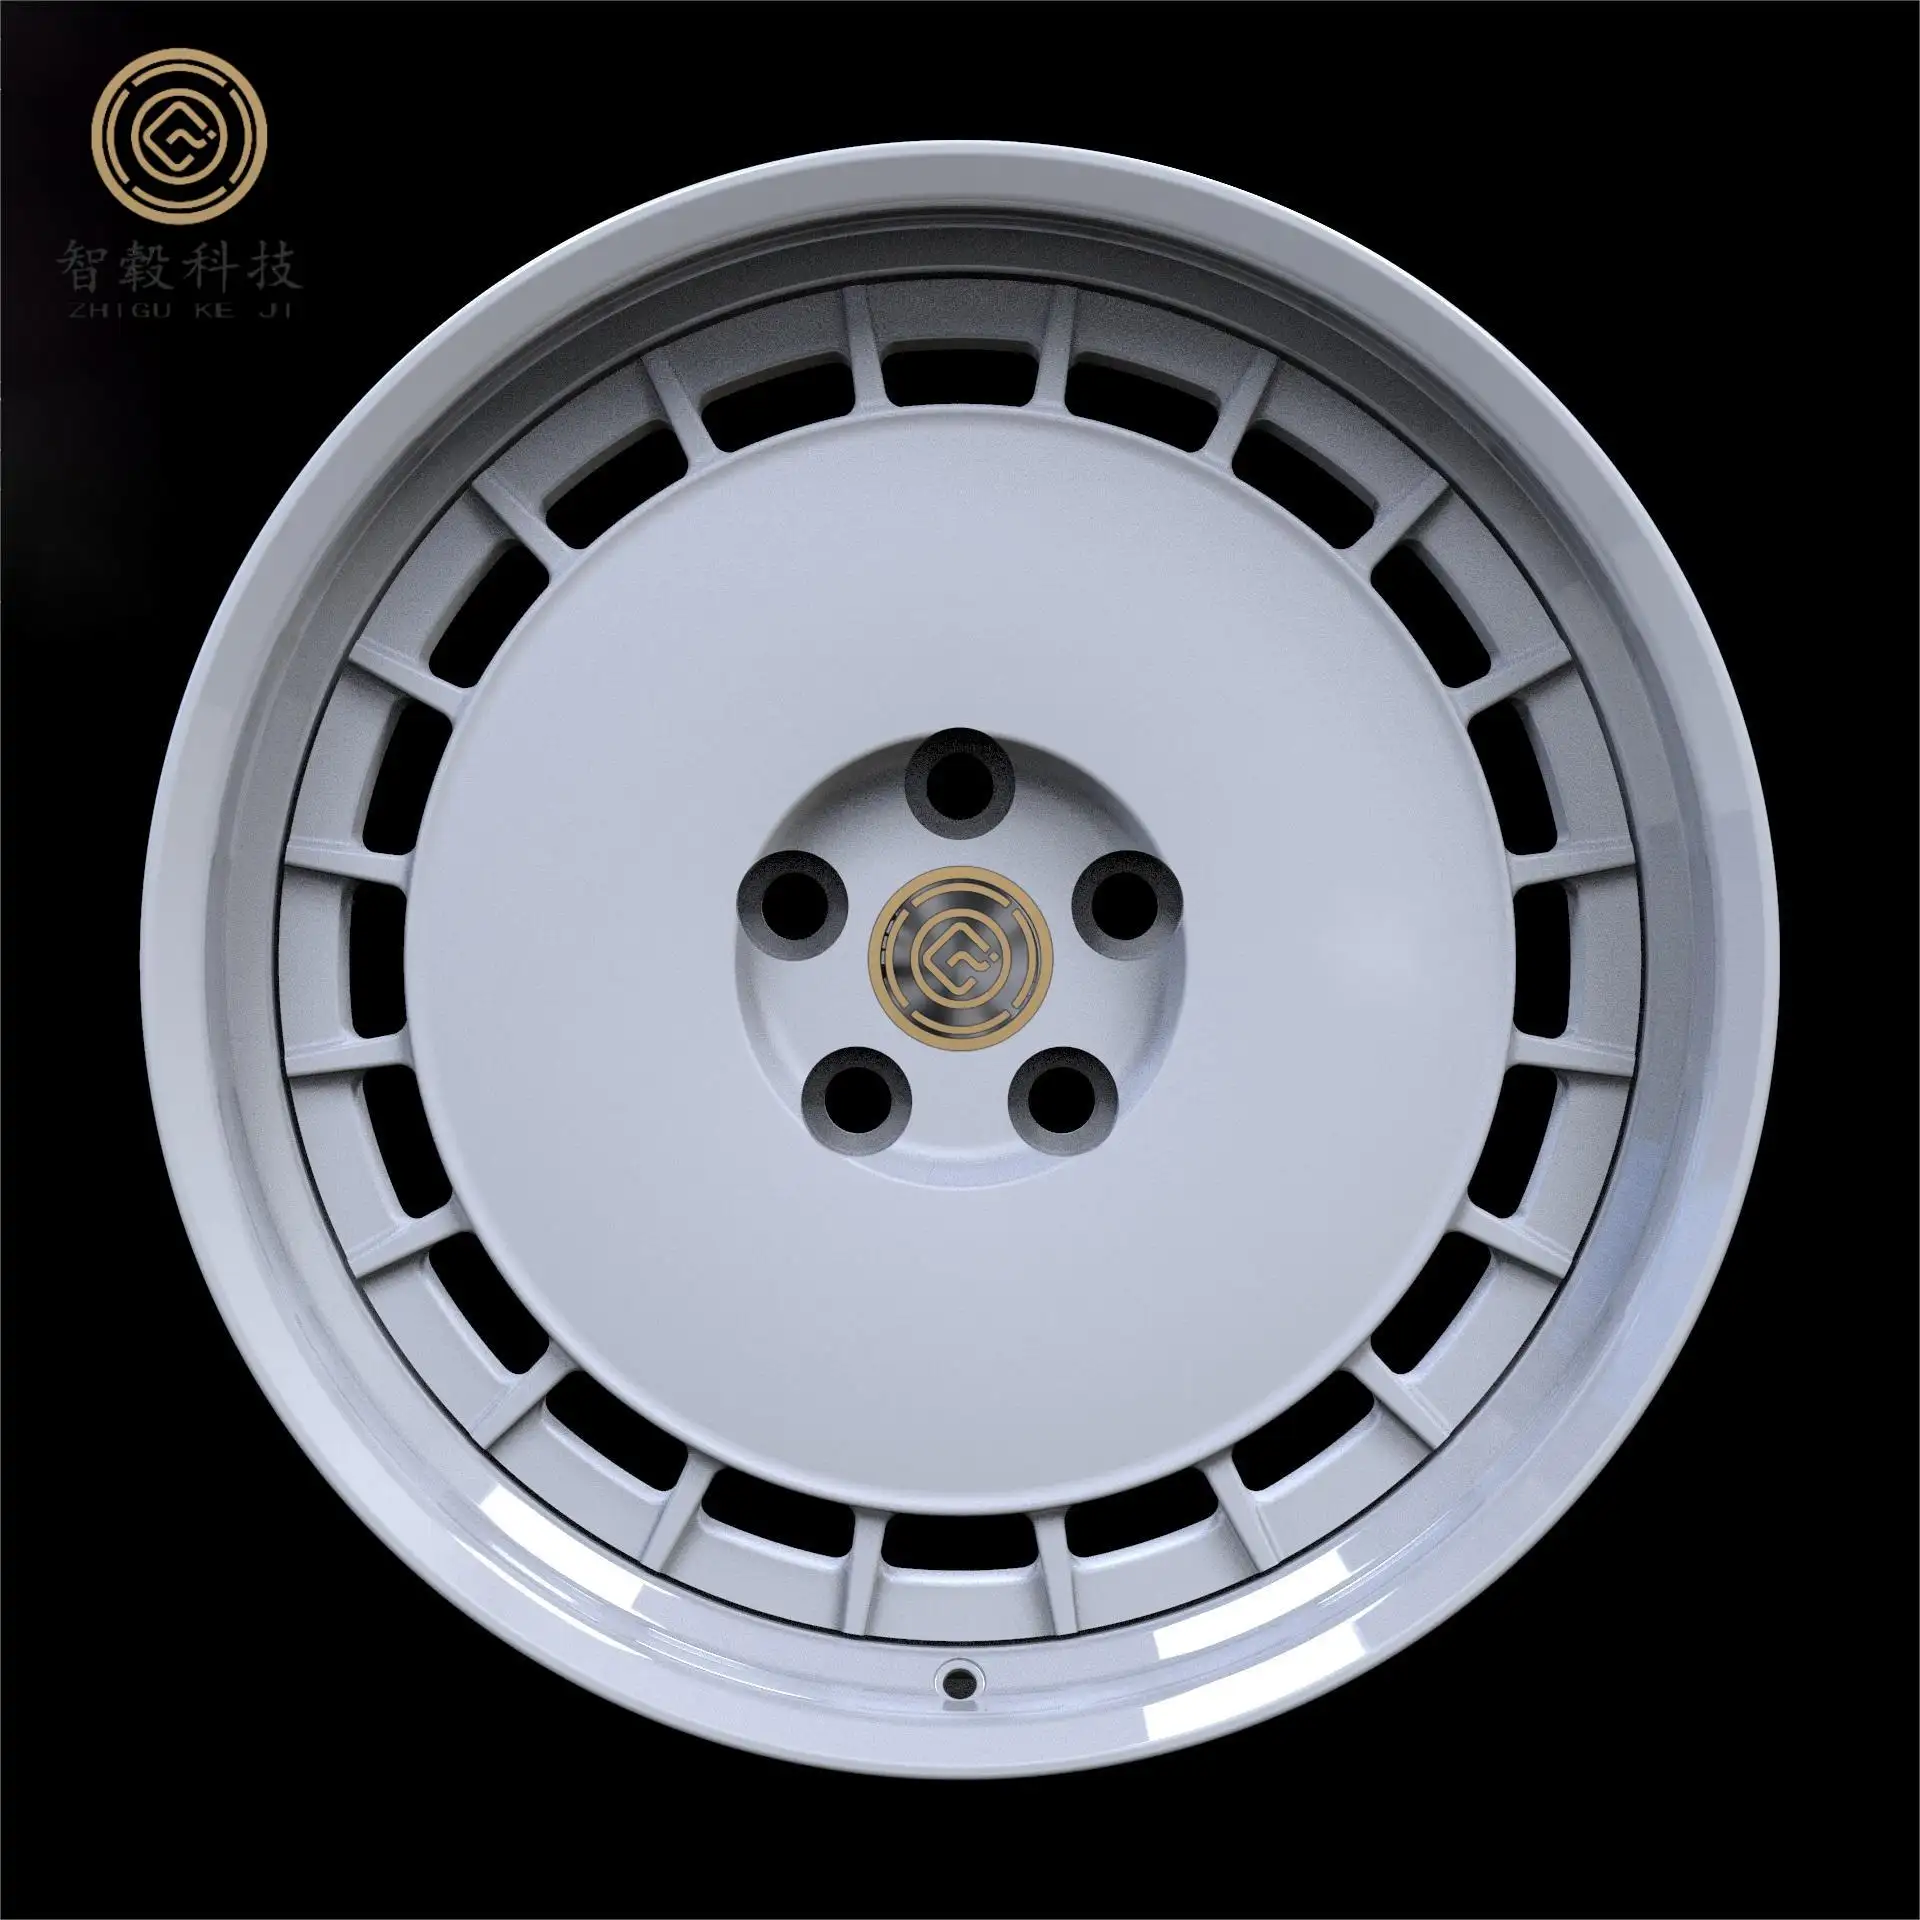 Special Deep Concave 20 Inch Forged Alloy Rims - 5x114.3 Forged Wheels Concave Gold Rims for Car M8